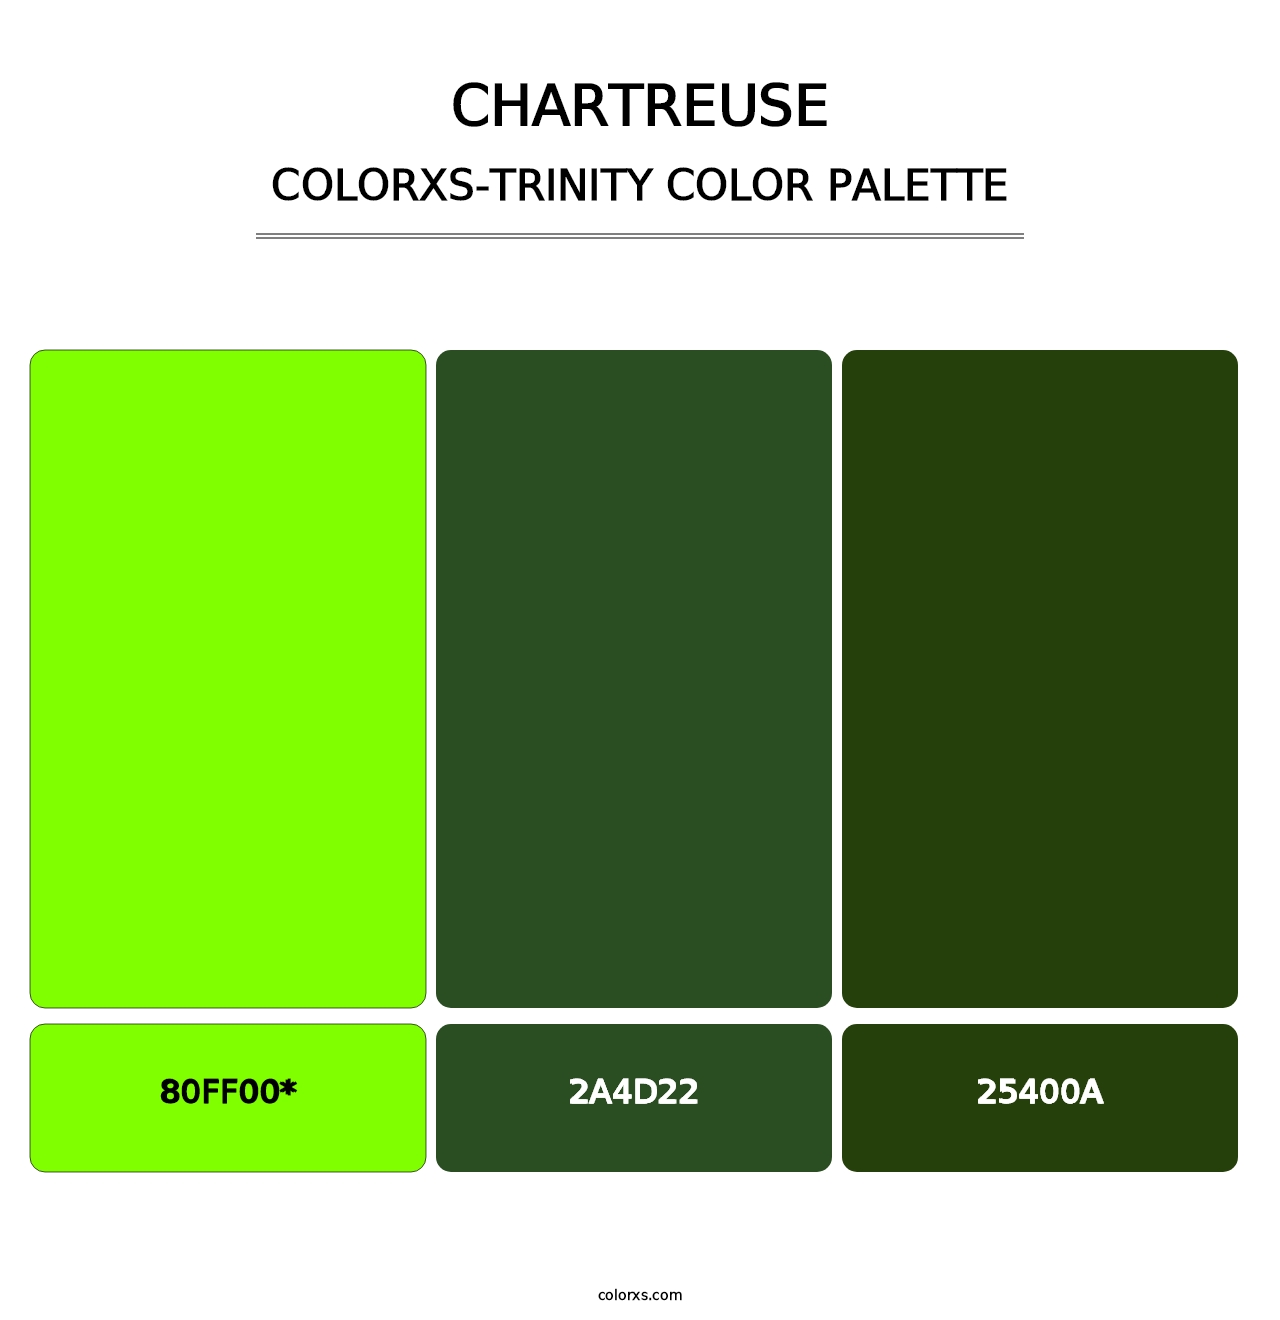 Chartreuse - Colorxs Trinity Palette